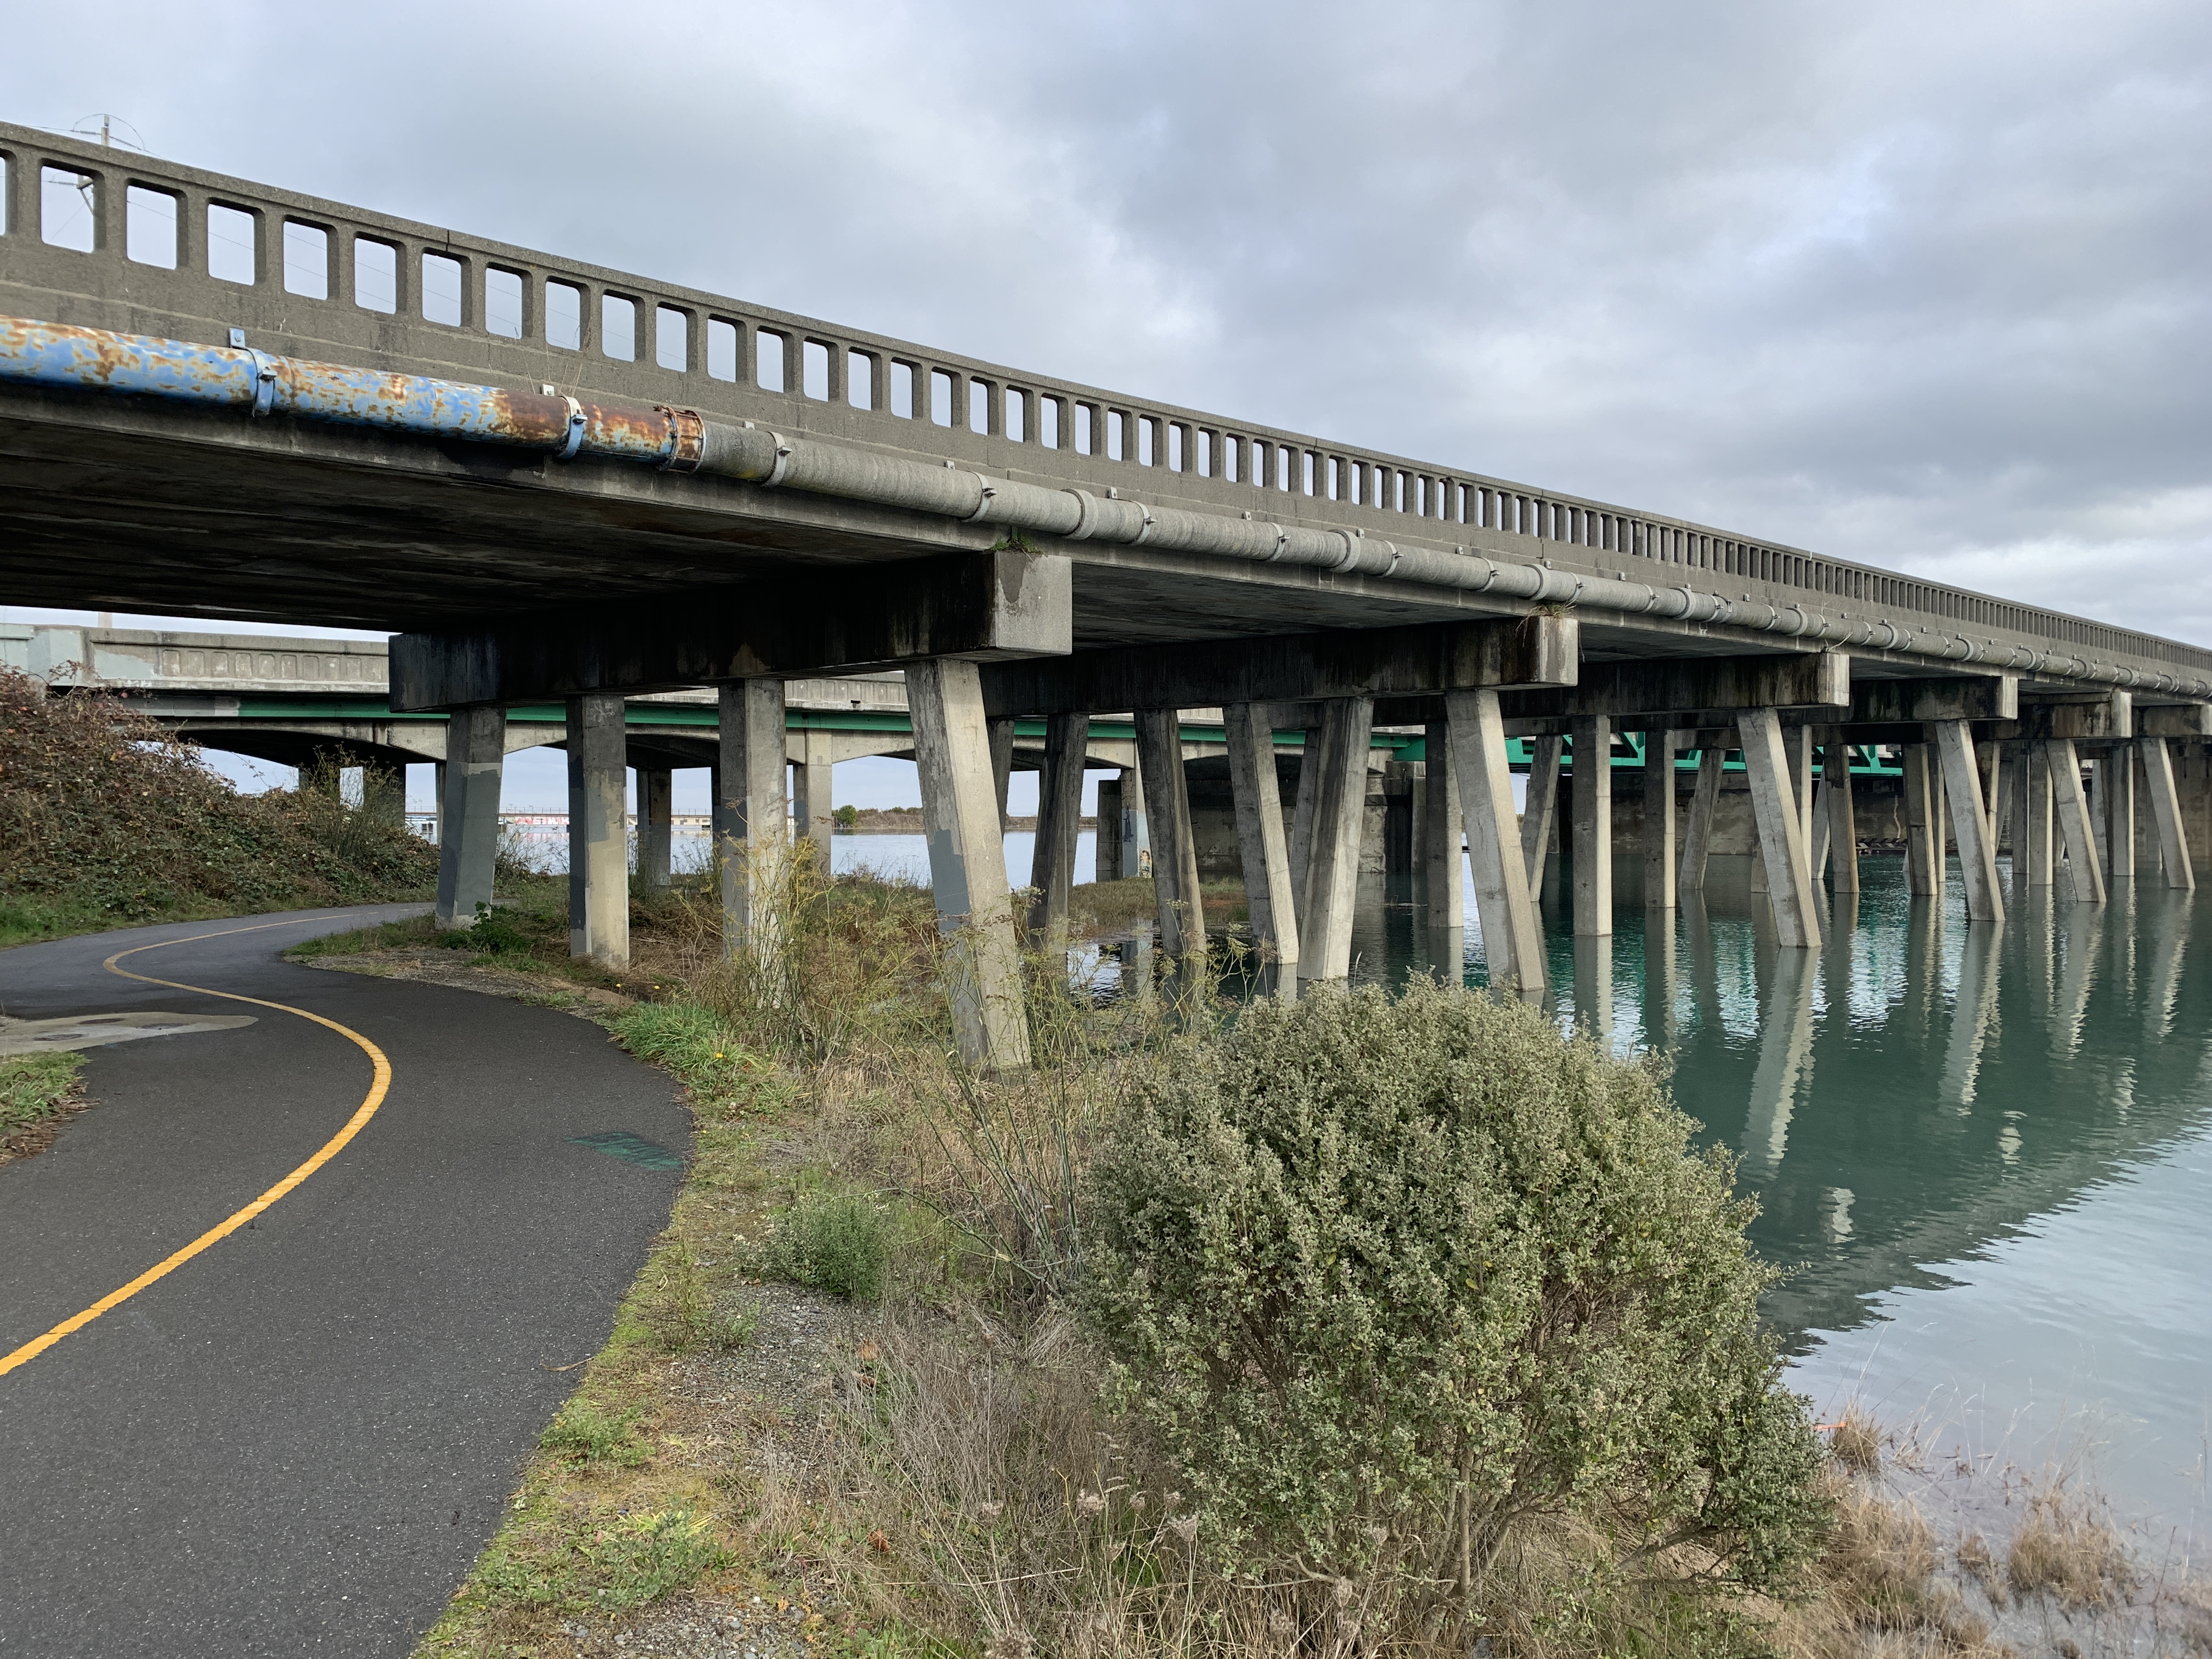 Eureka Slough Bridge from bike path. Concrete pillars extend from under the bridge deck into the green water of the Eureka Slough. 